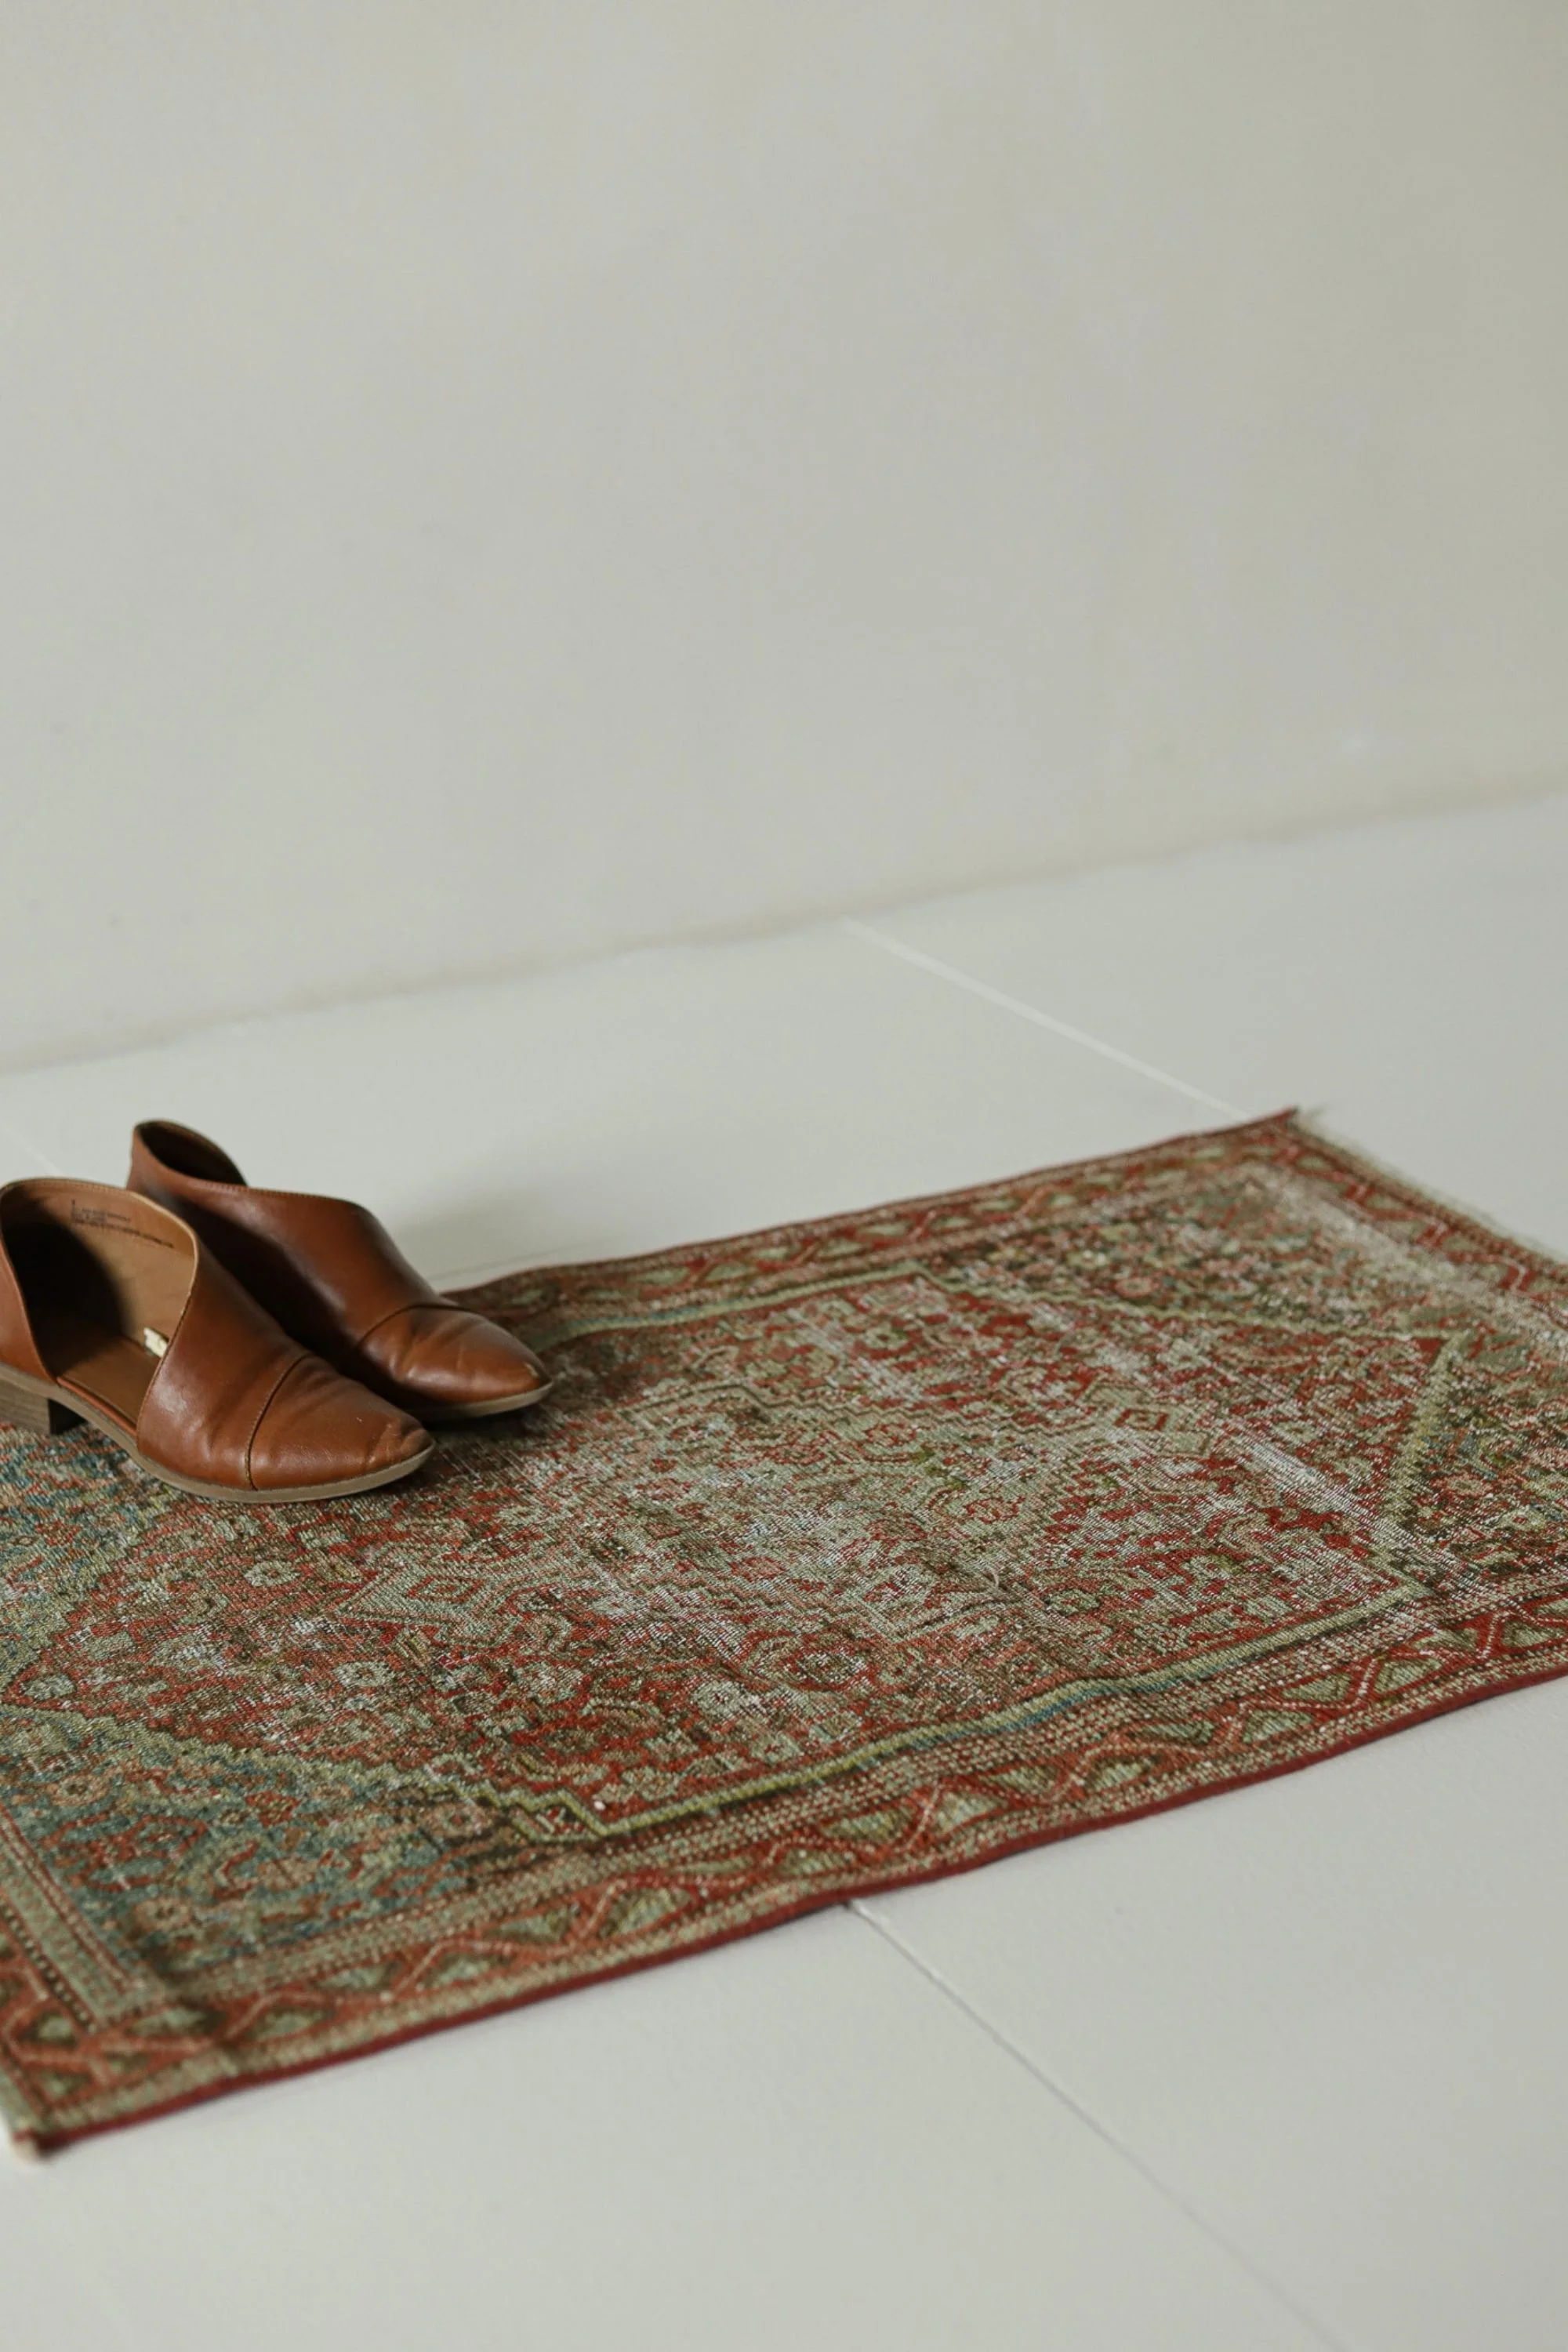 a pair of shoes sitting on top of a rug